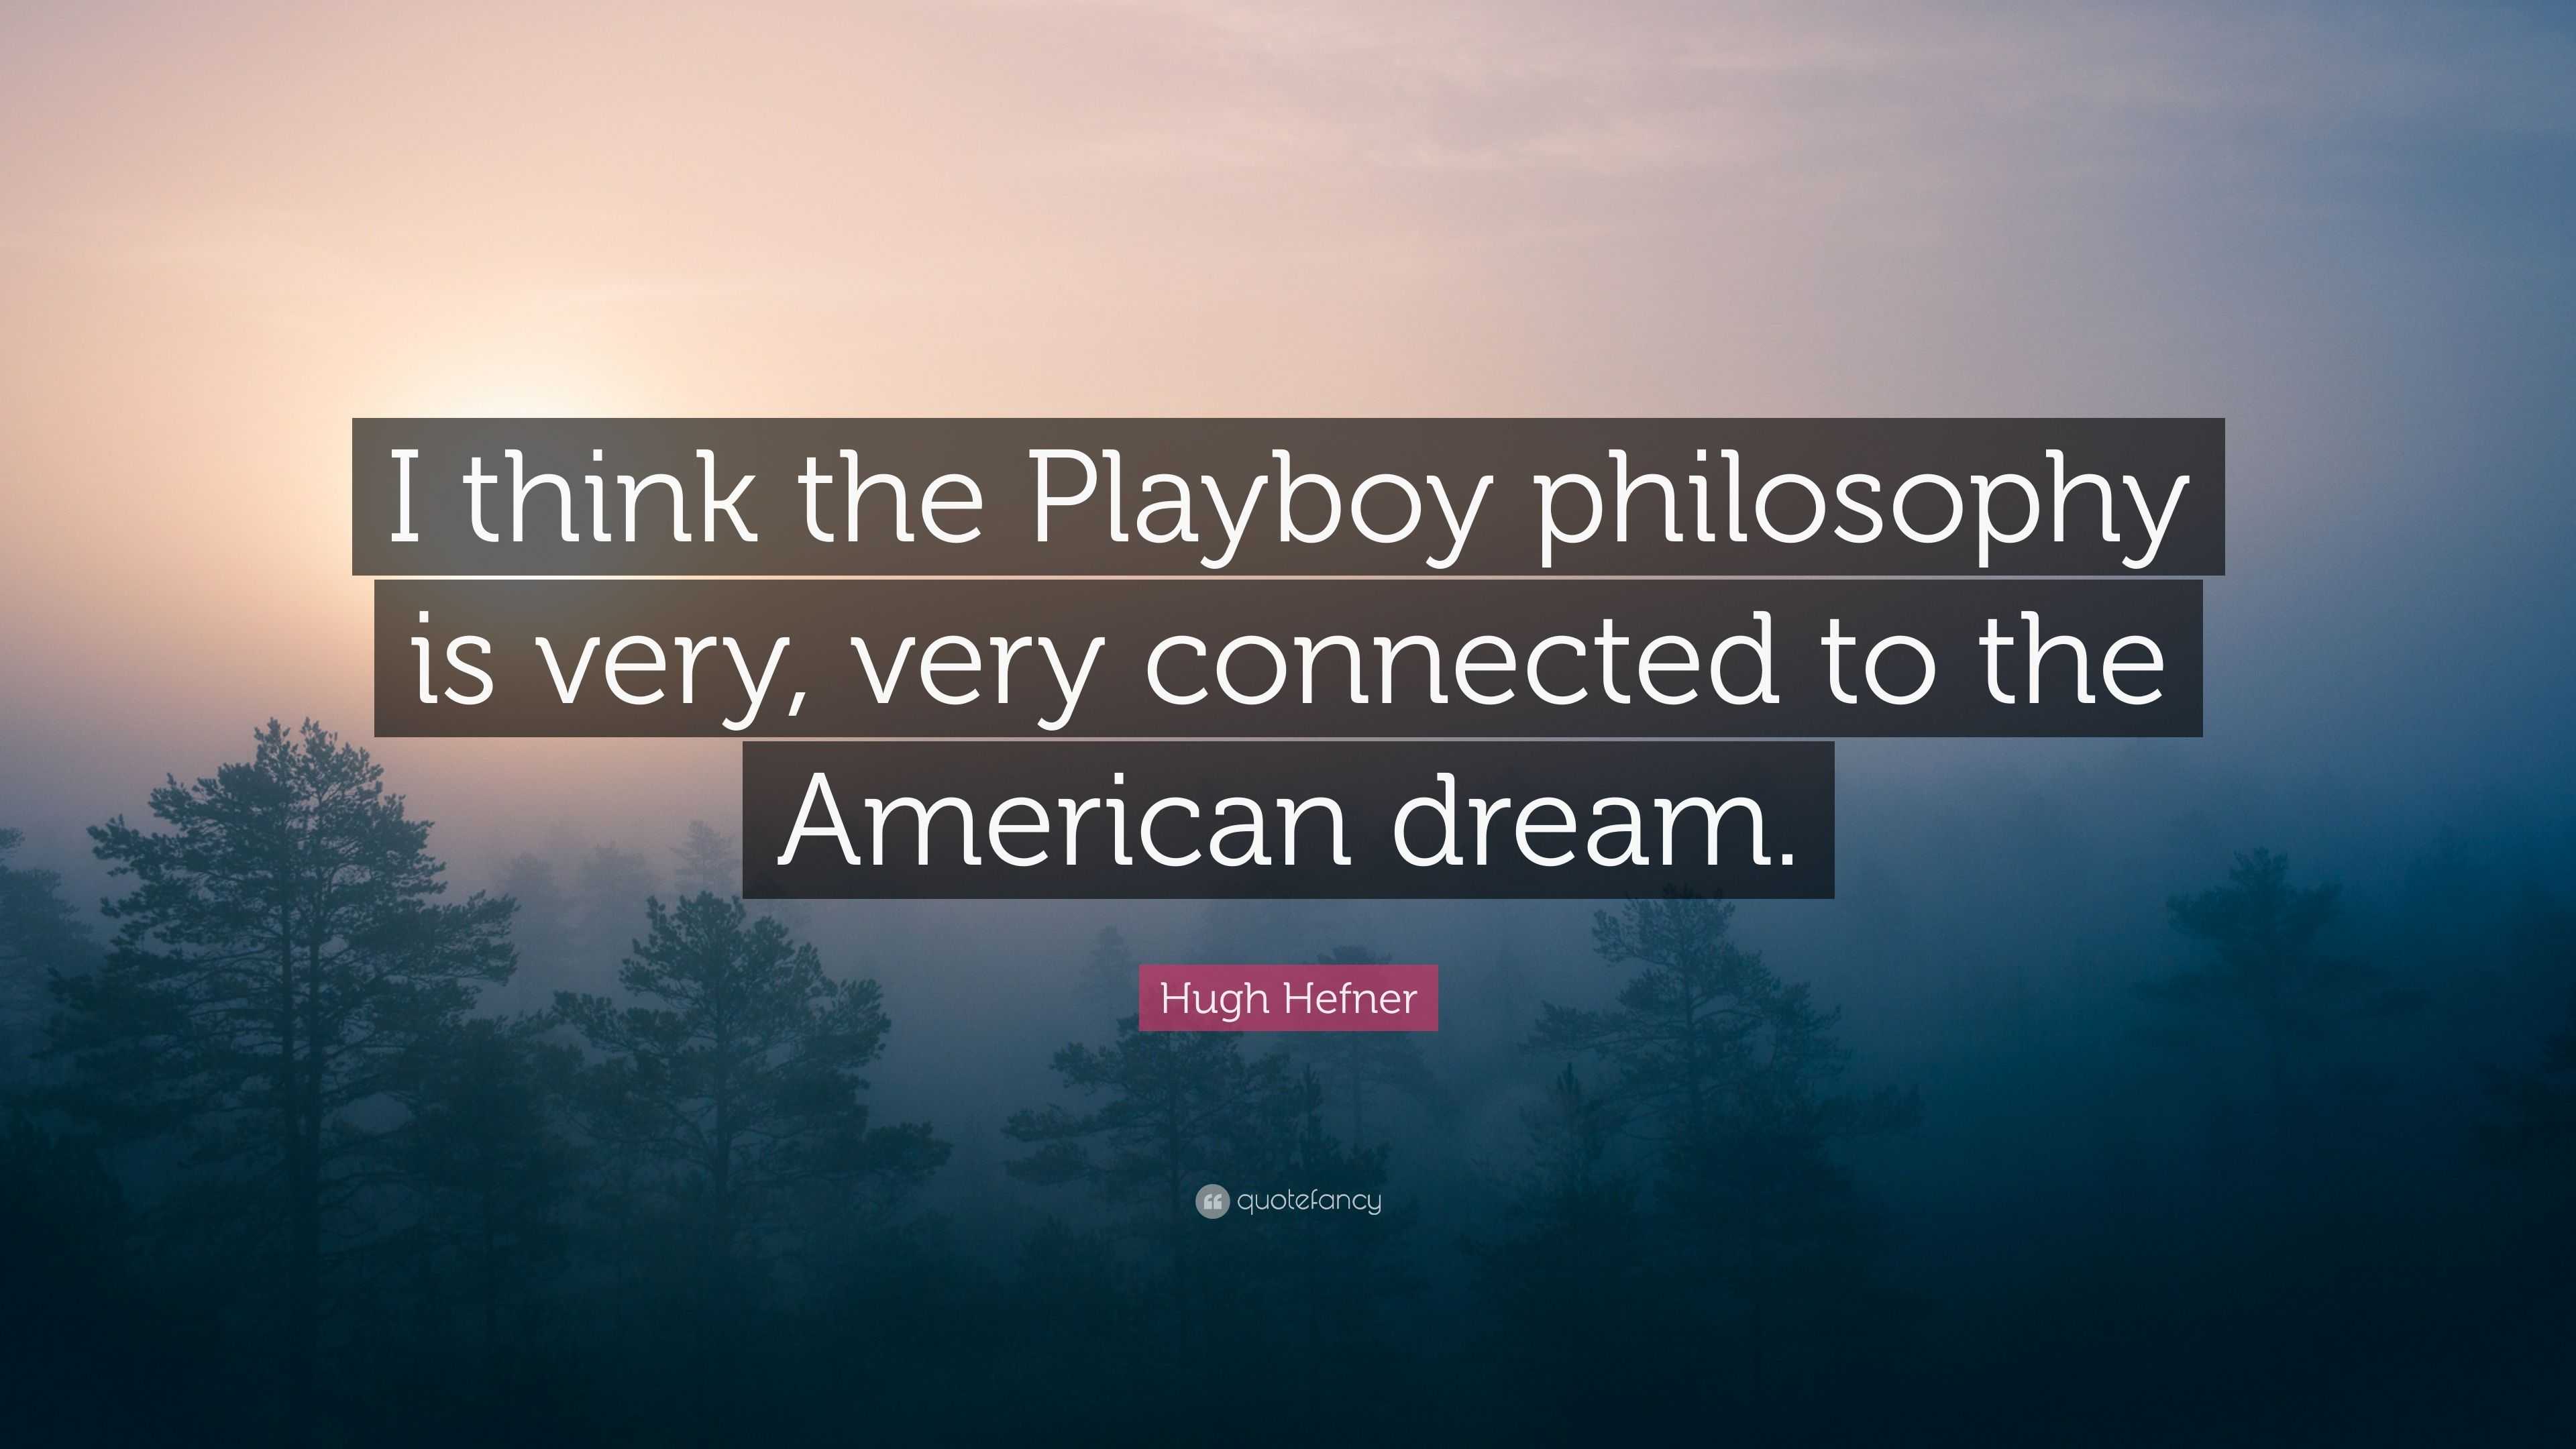 Hugh Hefner Quote: “I think the Playboy philosophy is very, very